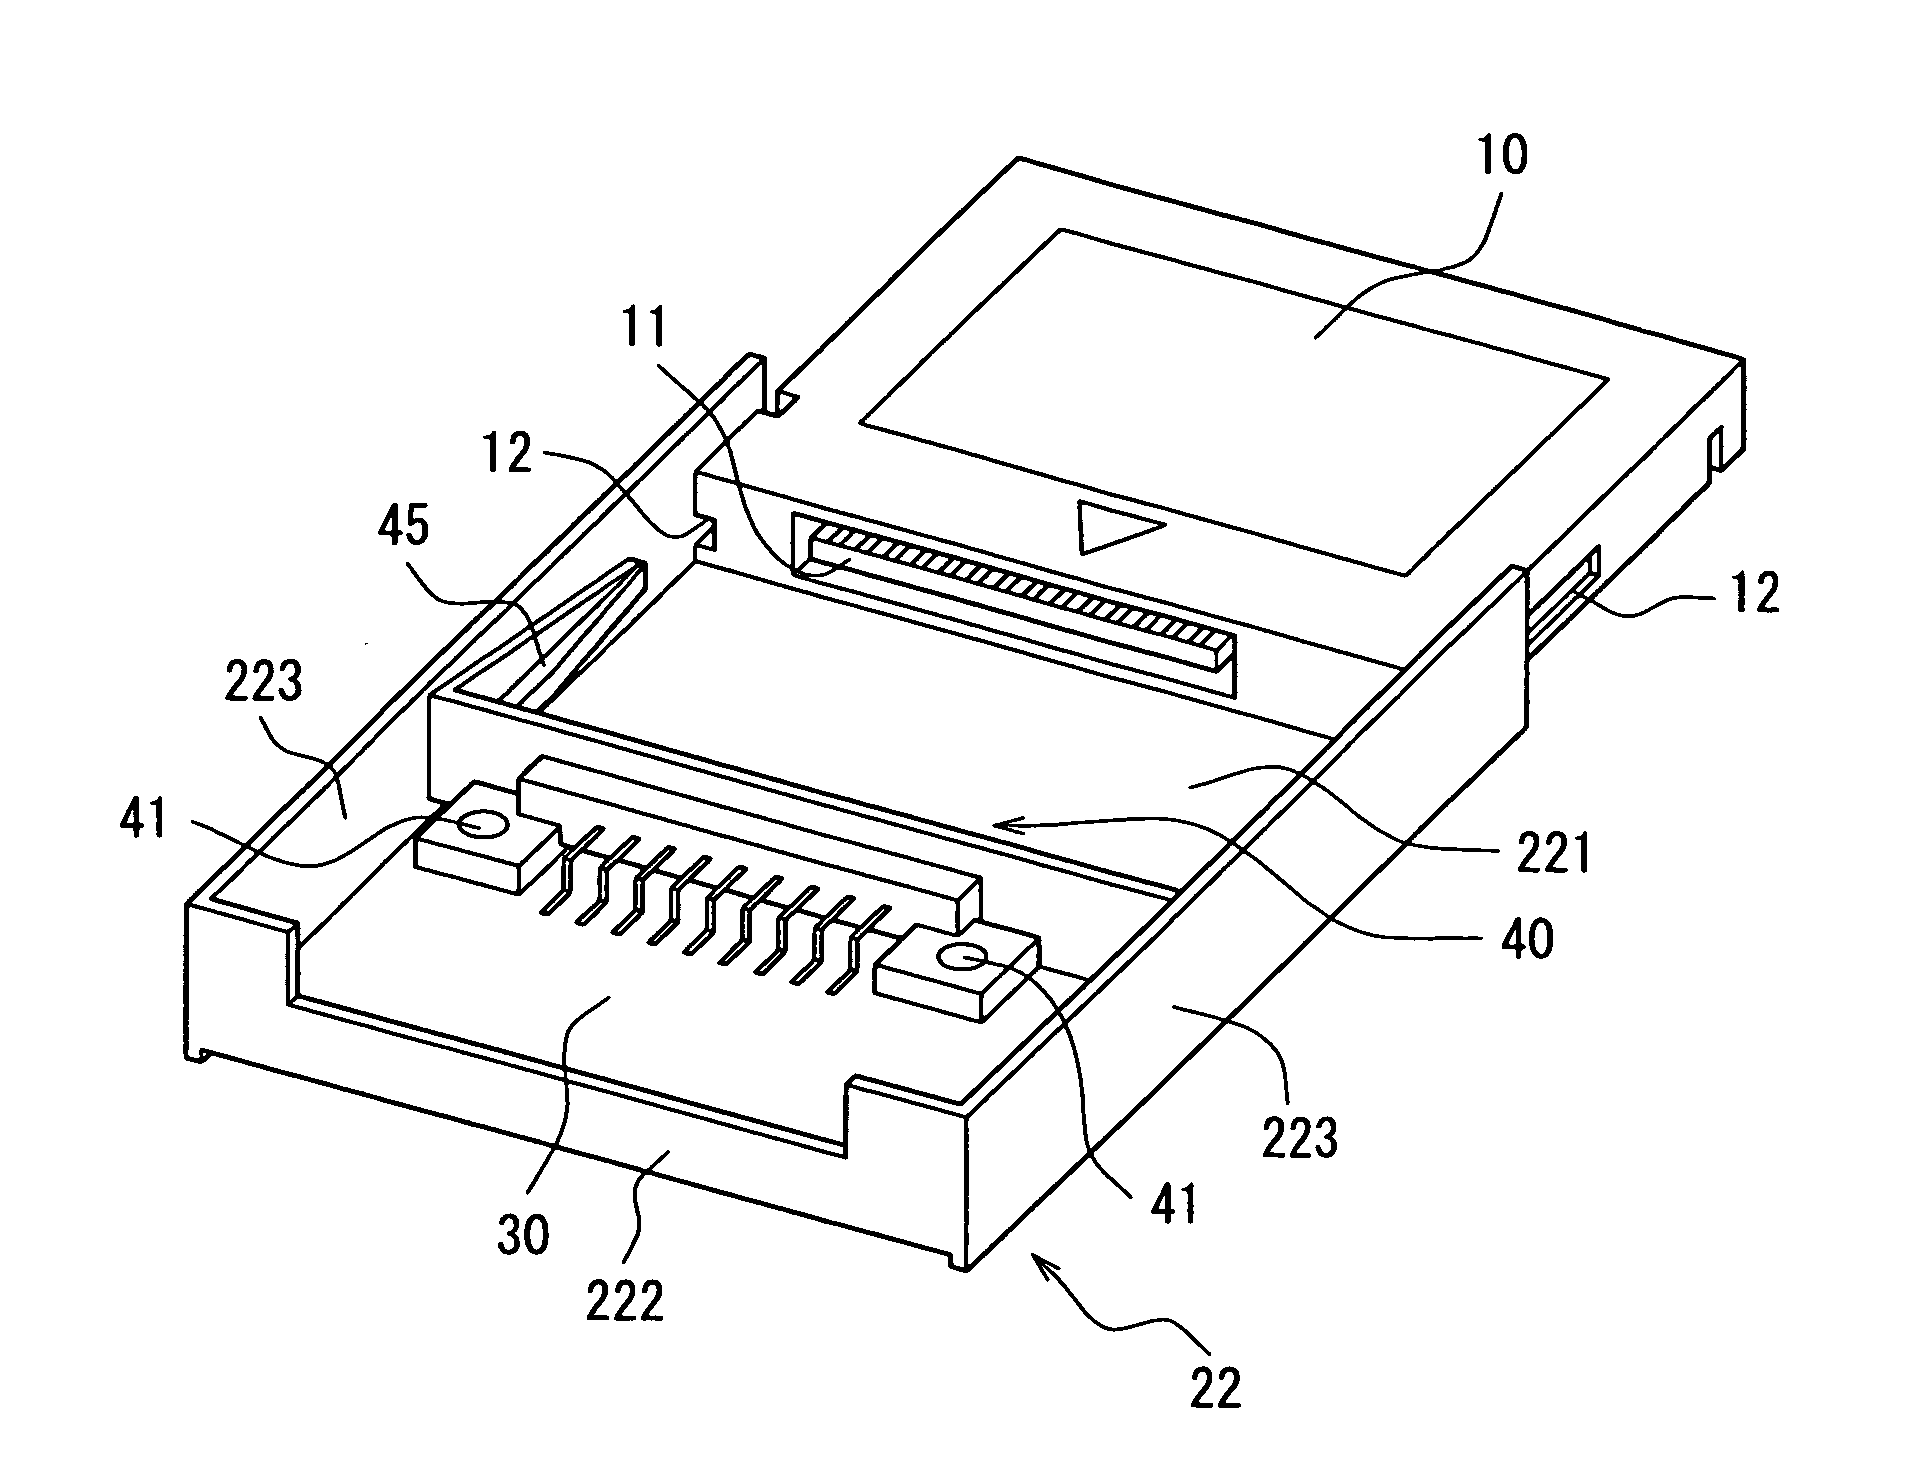 Connector having coupling guides for establishing connection with memory connector at right position